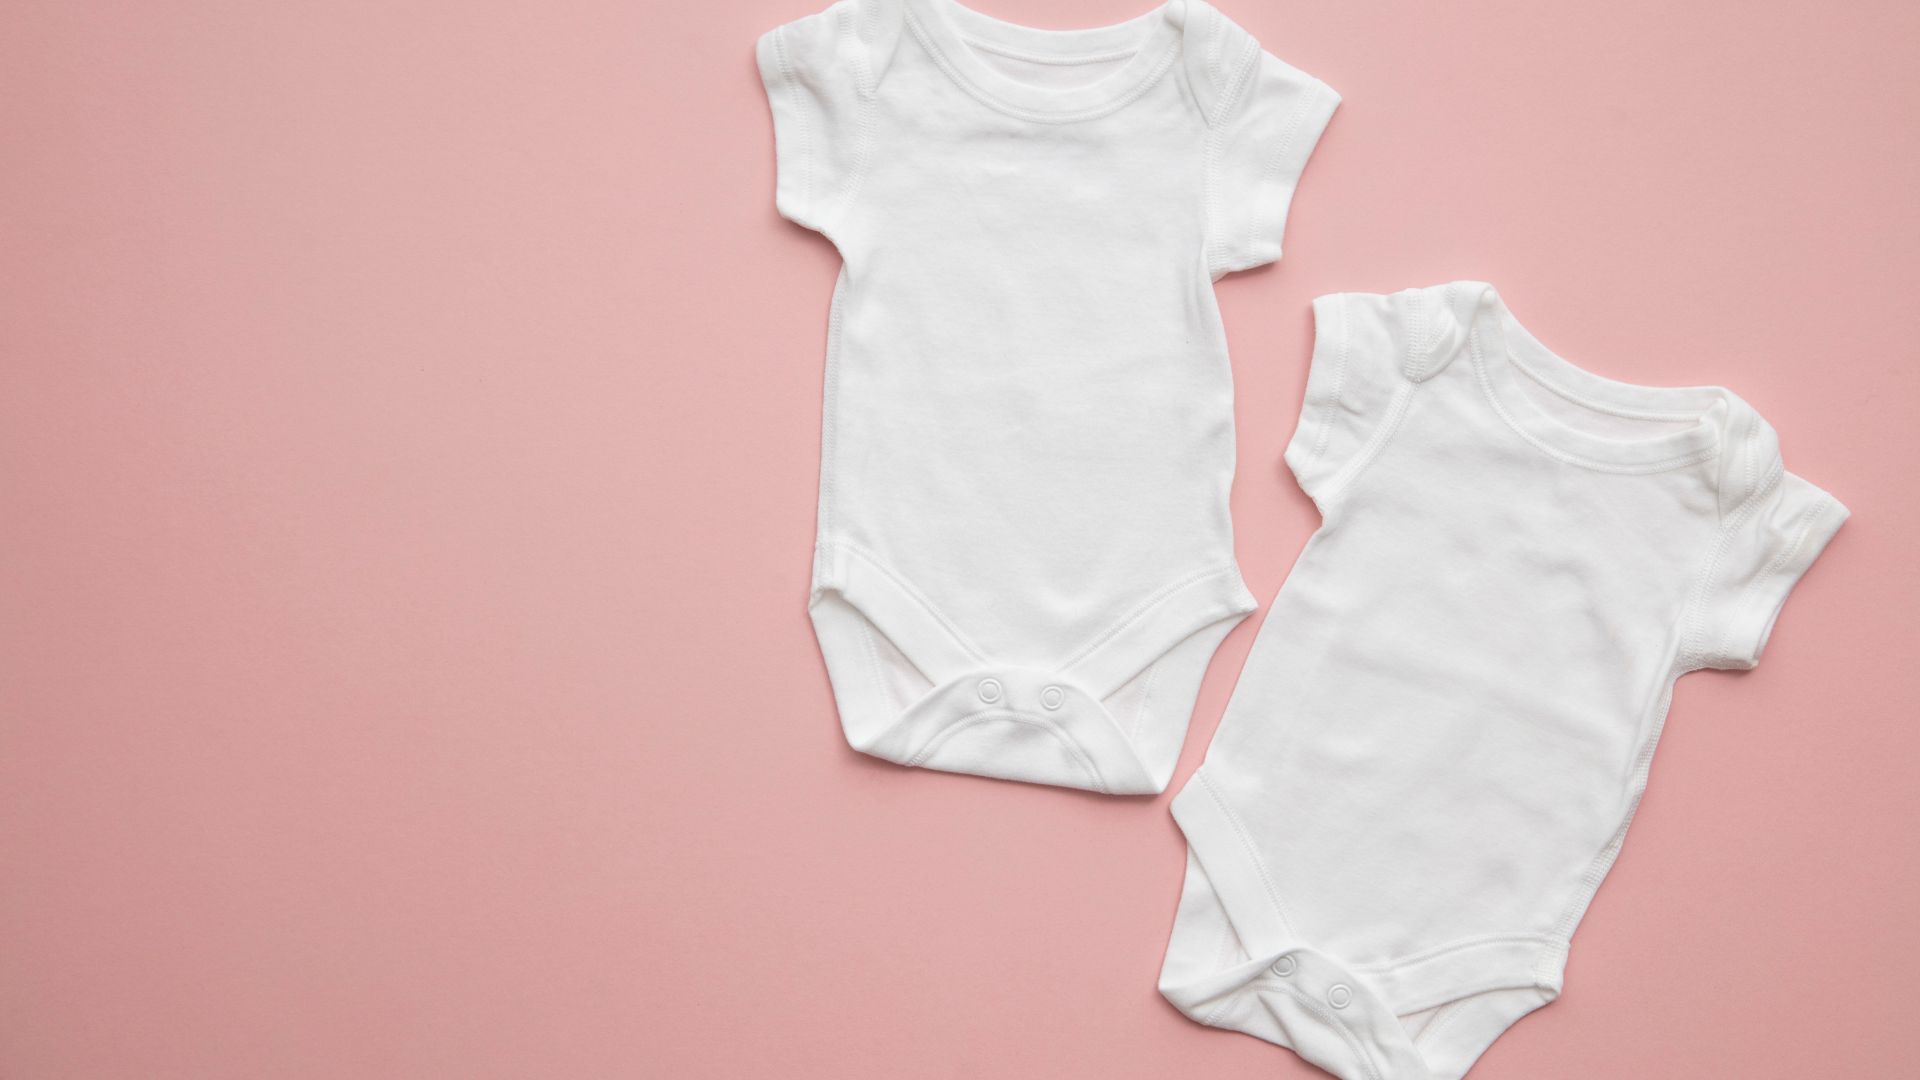 The onesie - The best garment for baby's first year